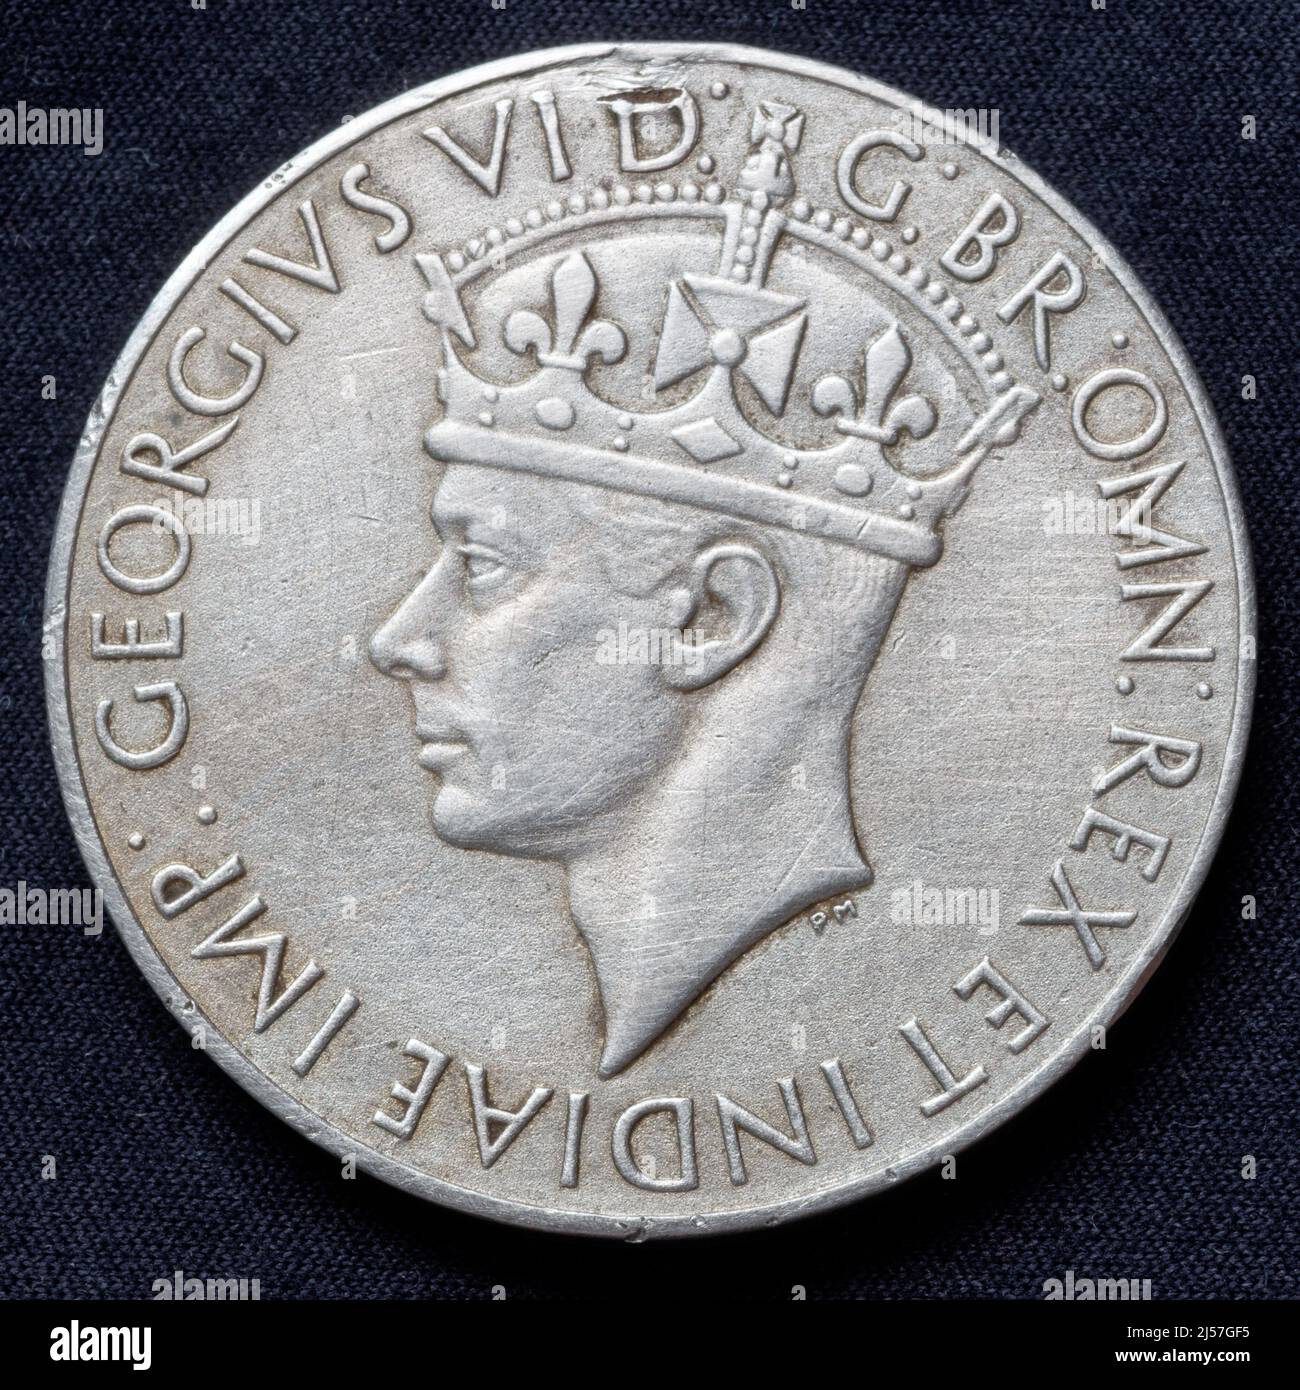 India: India Service Medal 1939 - 1945 (obverse), awarded to Indian Forces for at least 3 years of non-operational service in India between September 1938 and September 1945. This side shows King George VI, at the time titled King of Great Britain and Emperor of India. Stock Photo